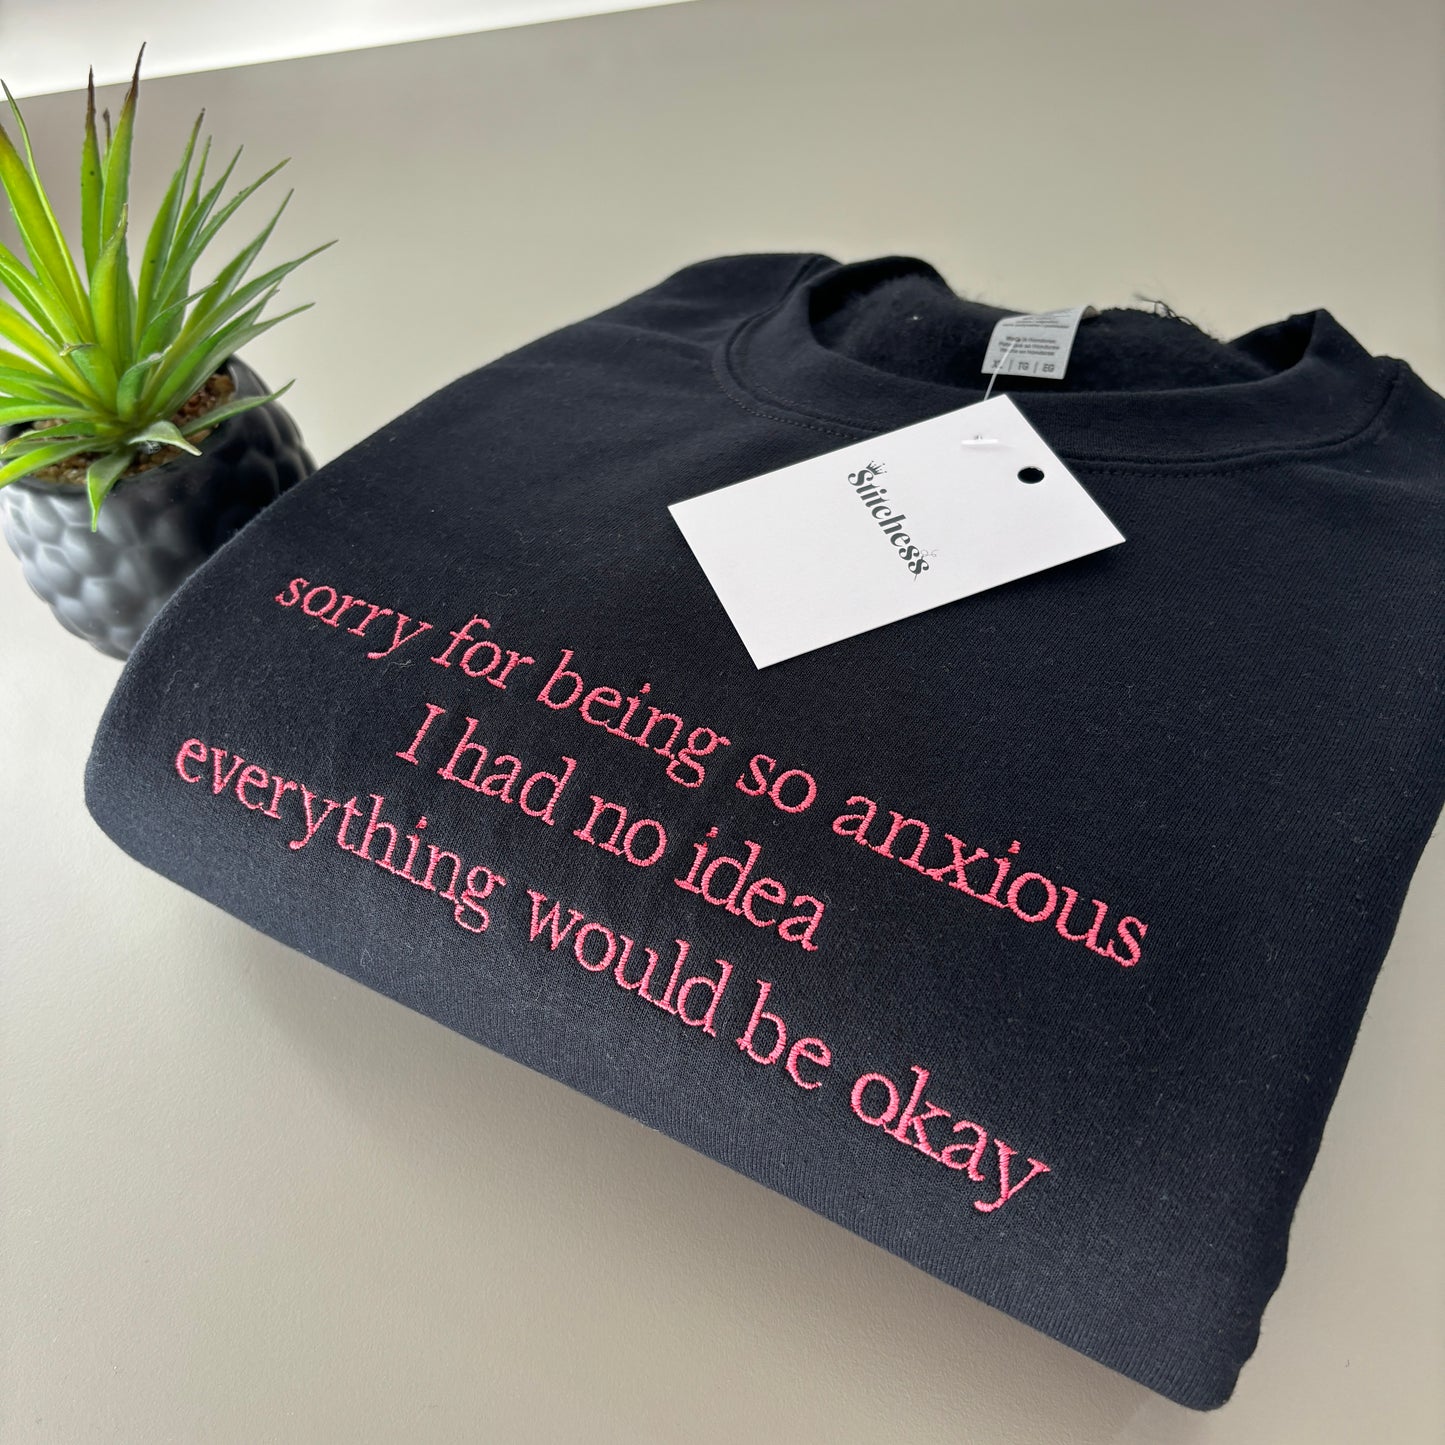 SORRY FOR BEING ANXIOUS EMBROIDERED SWEATSHIRT